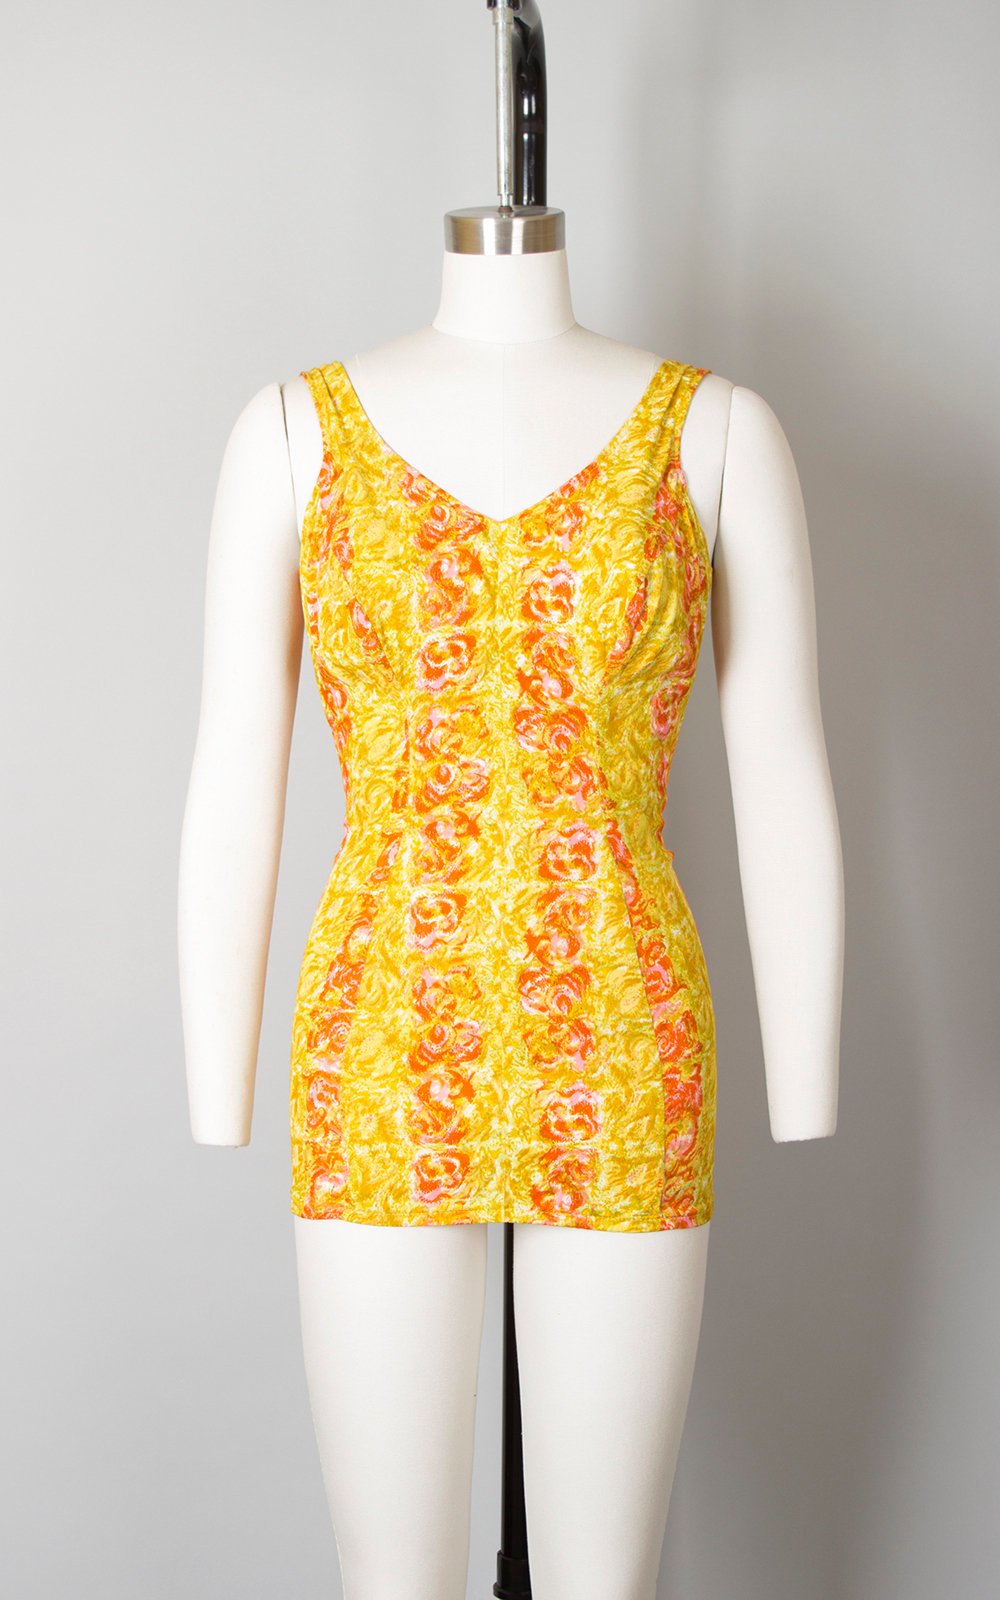 Vintage 1960s Swimsuit | 60s ROSE MARIE REID Rose Floral Print Striped Yellow Pink Open Back One Piece Pin Up Bathing Suit (medium/large)